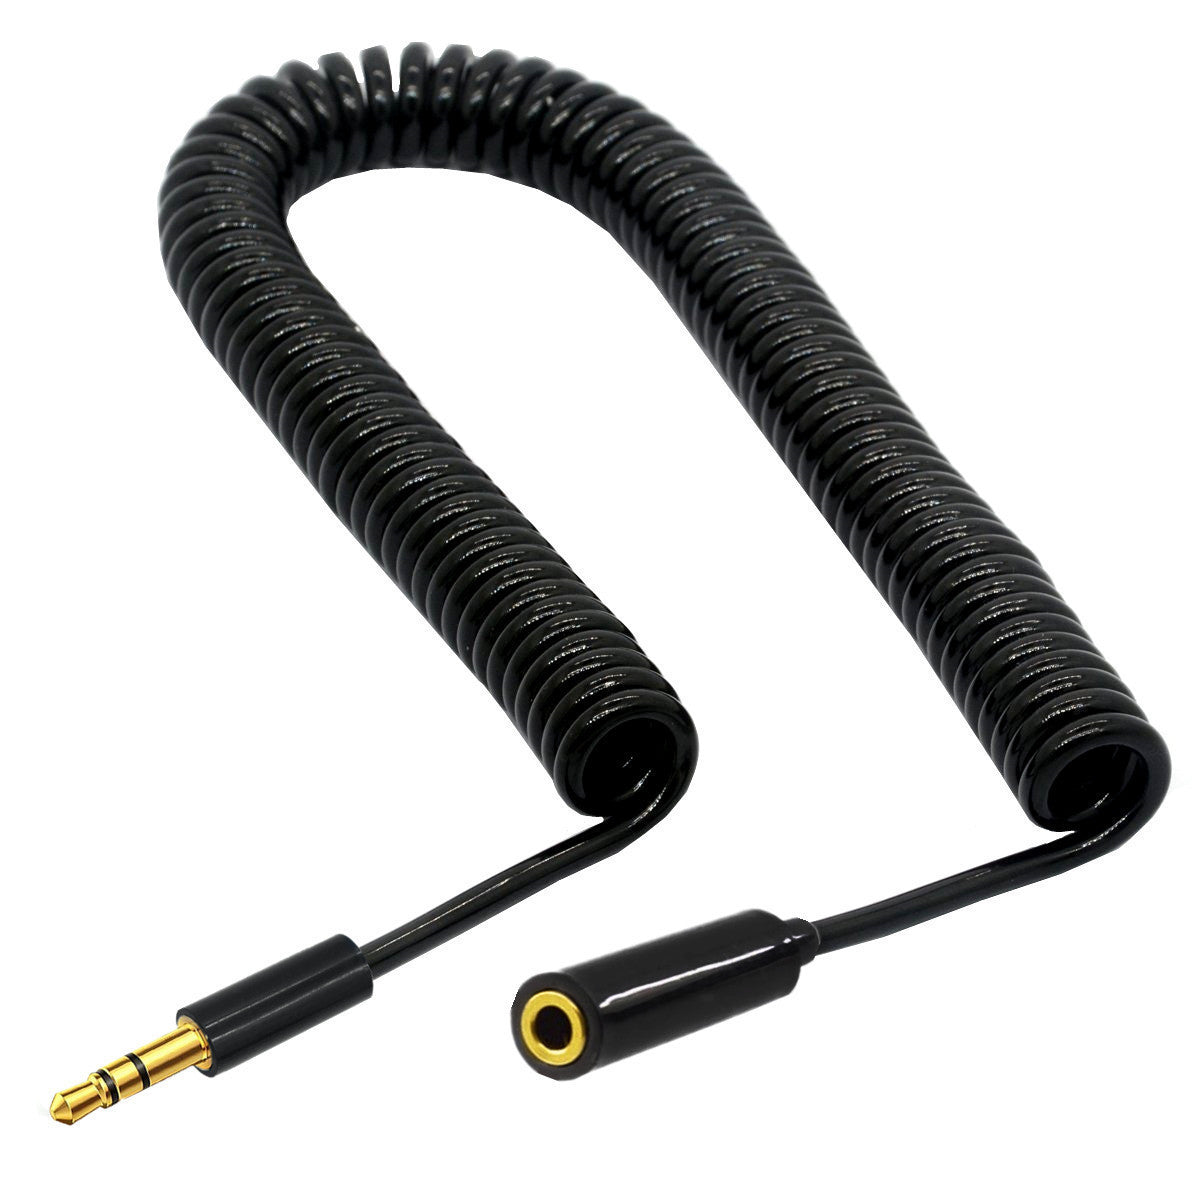 3.5mm 1/8" 3Pole TRS Stereo Male to Female Audio Spiral Cable